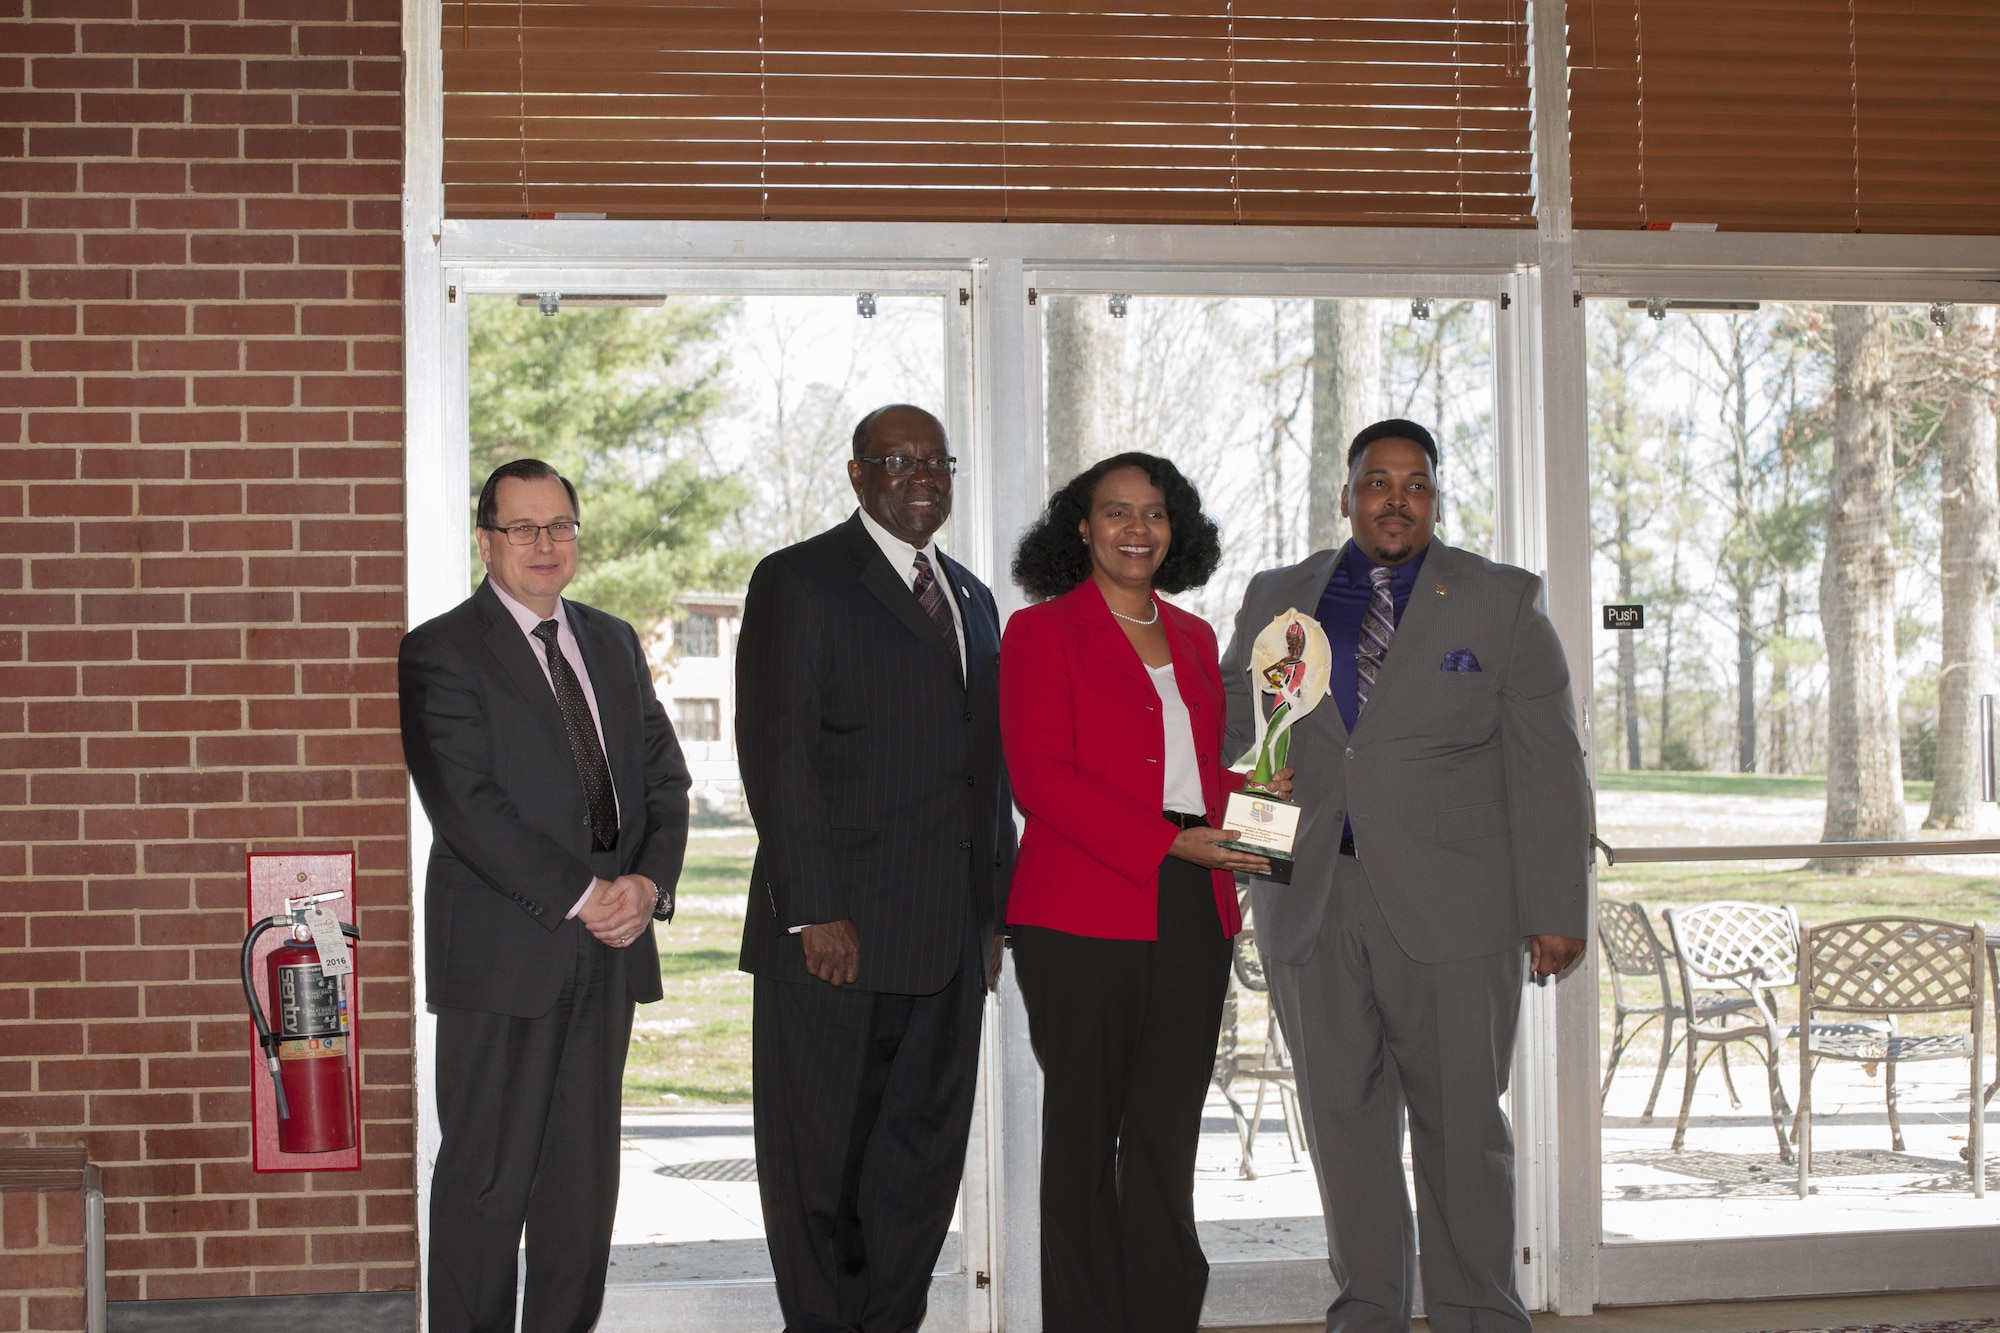 Willie Jo Taylor, second from right, a retiree of AEDC, received the AEDC African American Heritage Committee Achievement of Excellence award at the luncheon Feb. 16 at Arnold Lakeside Center. Taylor was one of the first black females to work at AEDC as part of a stay-in-school program in 1979. She was accompanied at the luncheon by her husband of 37 years, Gregory Taylor, and her daughter, AEDC team member Dana Taylor Henry. Pictured during the award presentation, left to right, are Dr. Mark Mehalic, AEDC executive director; Dr. Andrew Hugine Jr., president of Alabama A&M University; Taylor; and Artious Walker, member of the AEDC African American Heritage Committee. (U.S. Air Force photo/Jacqueline Cowan)